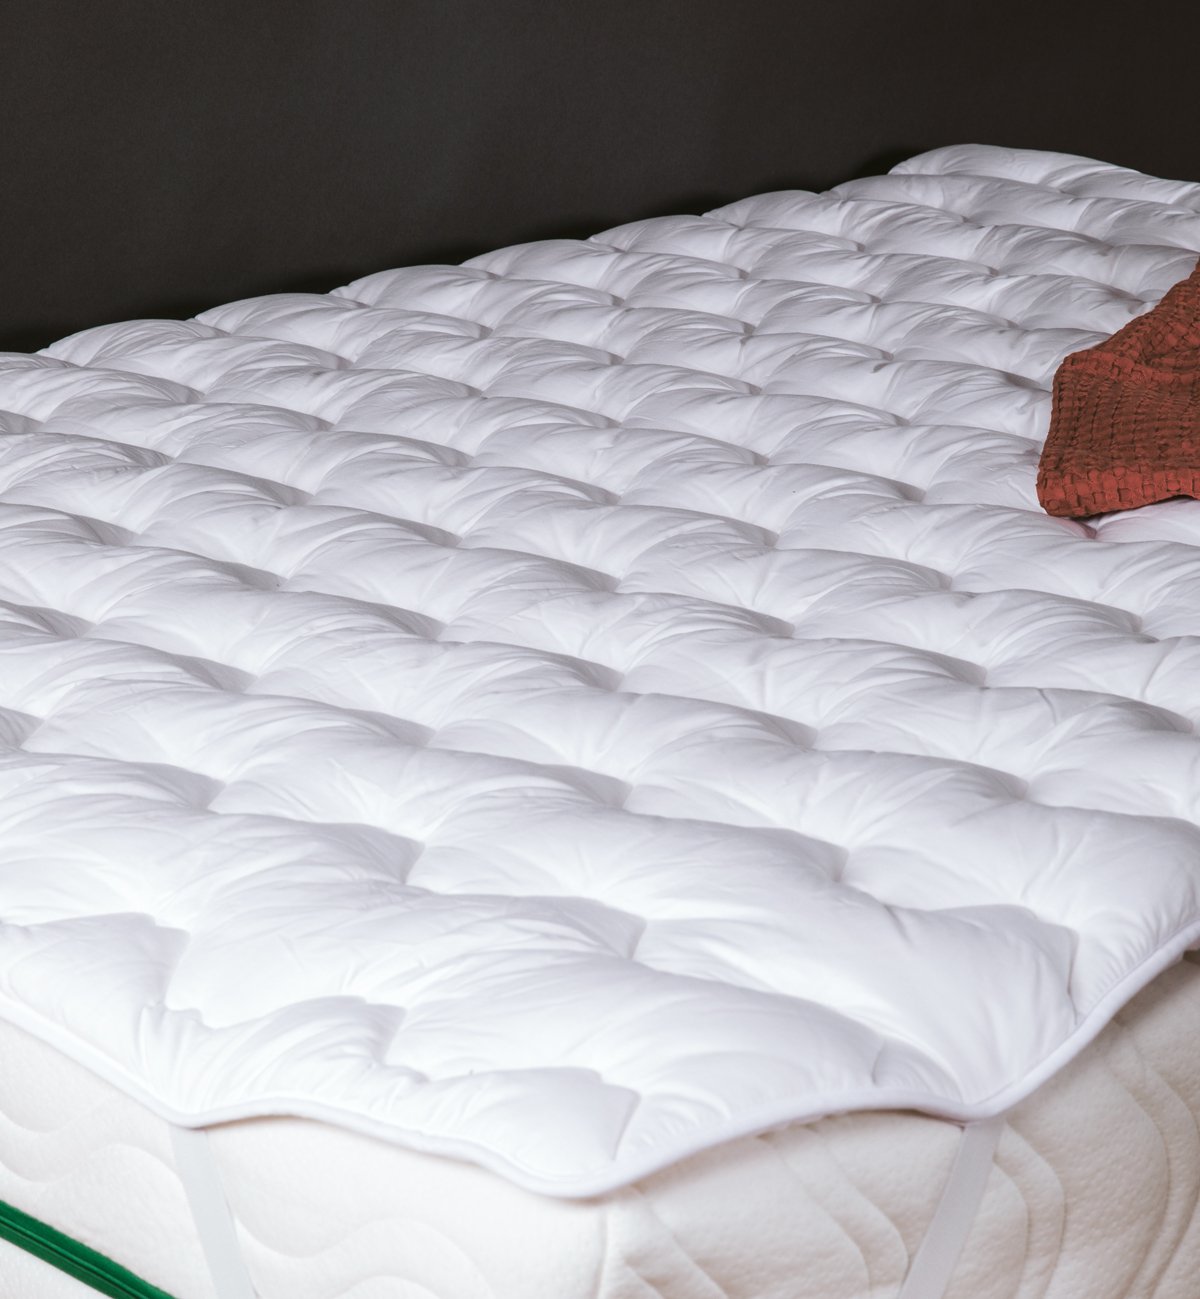 mattress topper 140x190cm, 160x200cm and other sizes for comfort even better than memory foam